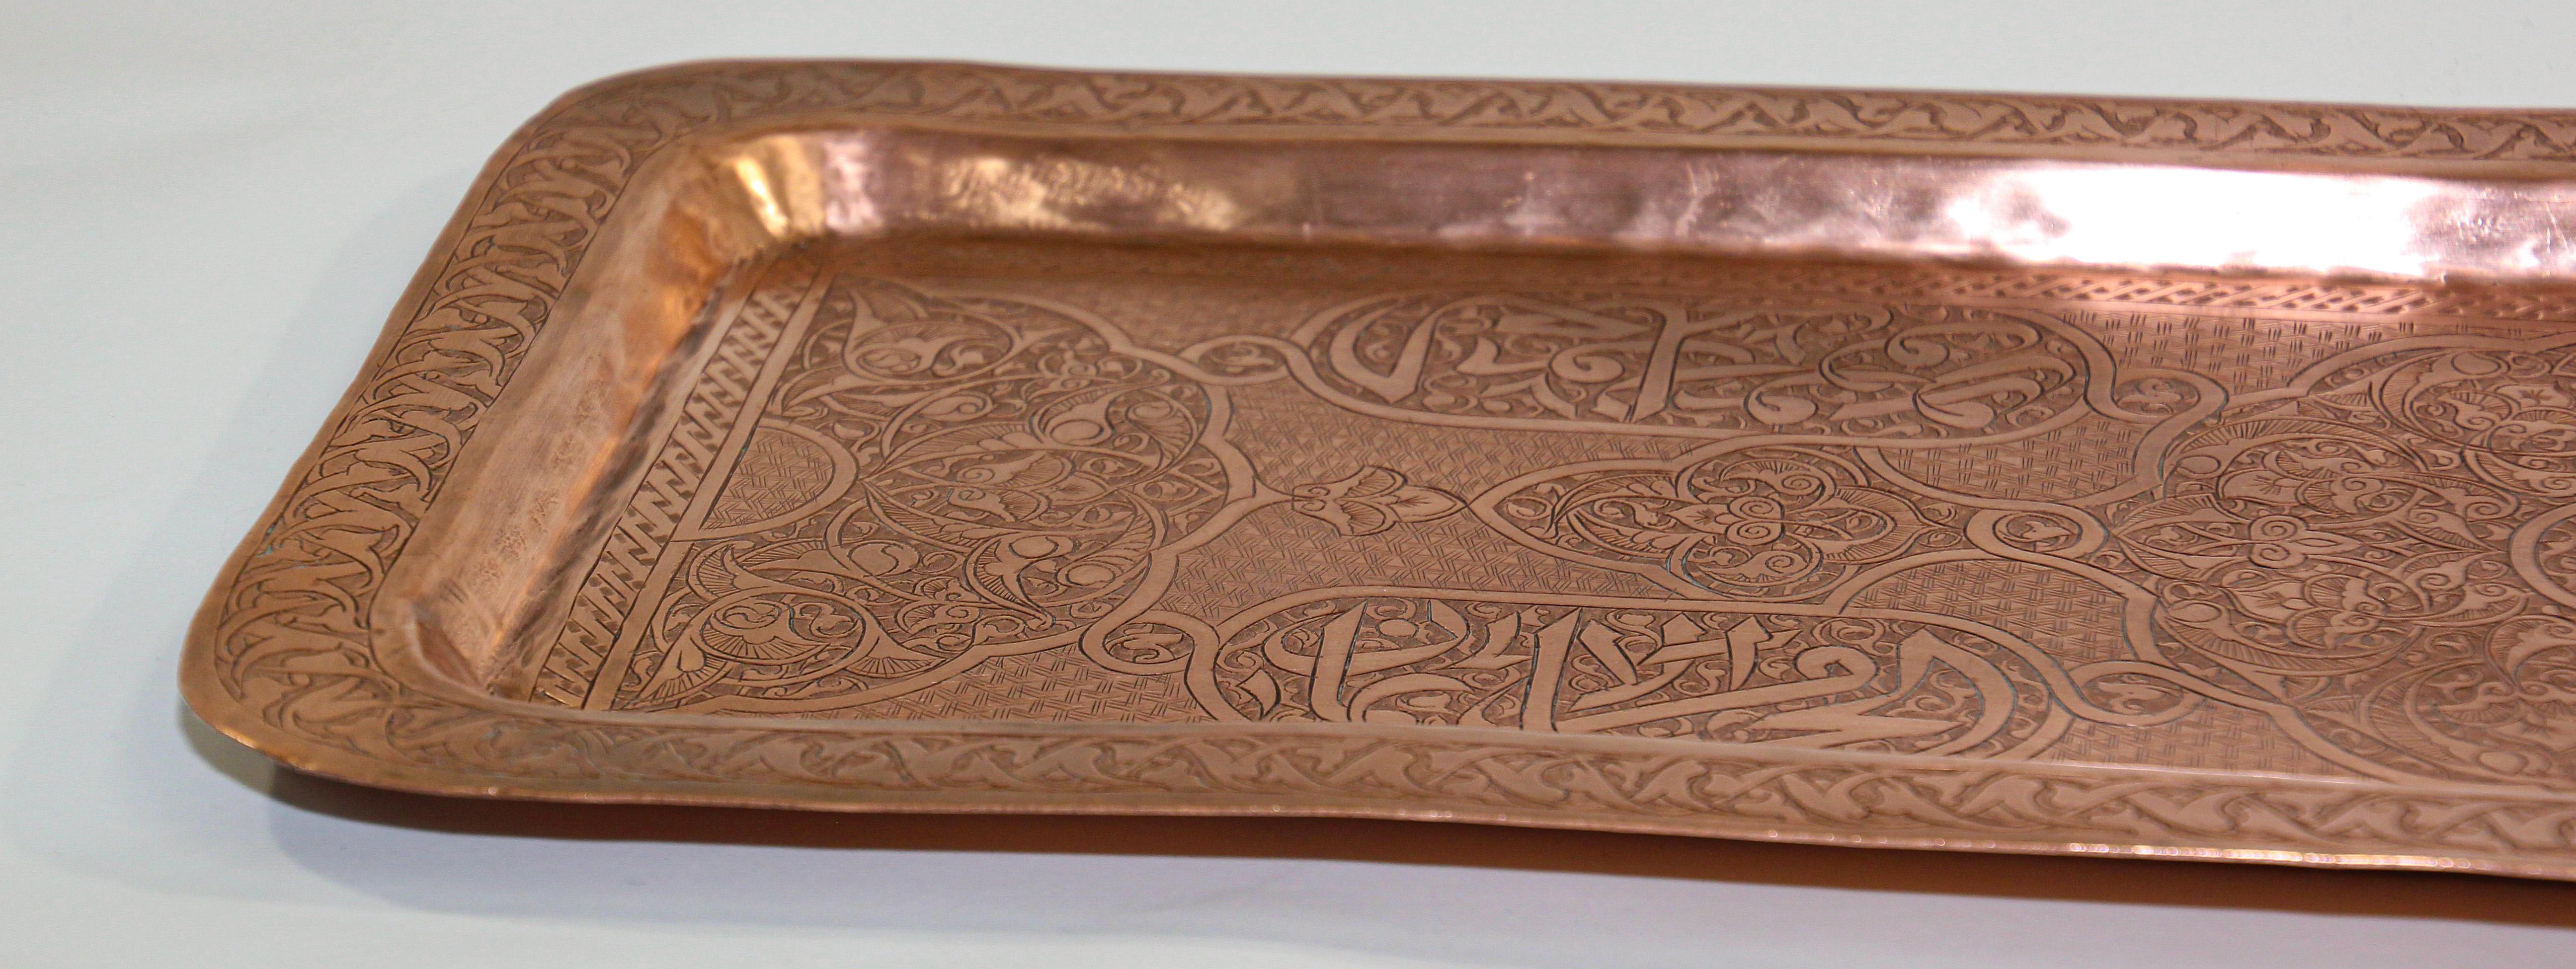 Antique Indo Persian Copper Charger Serving Tray For Sale 6